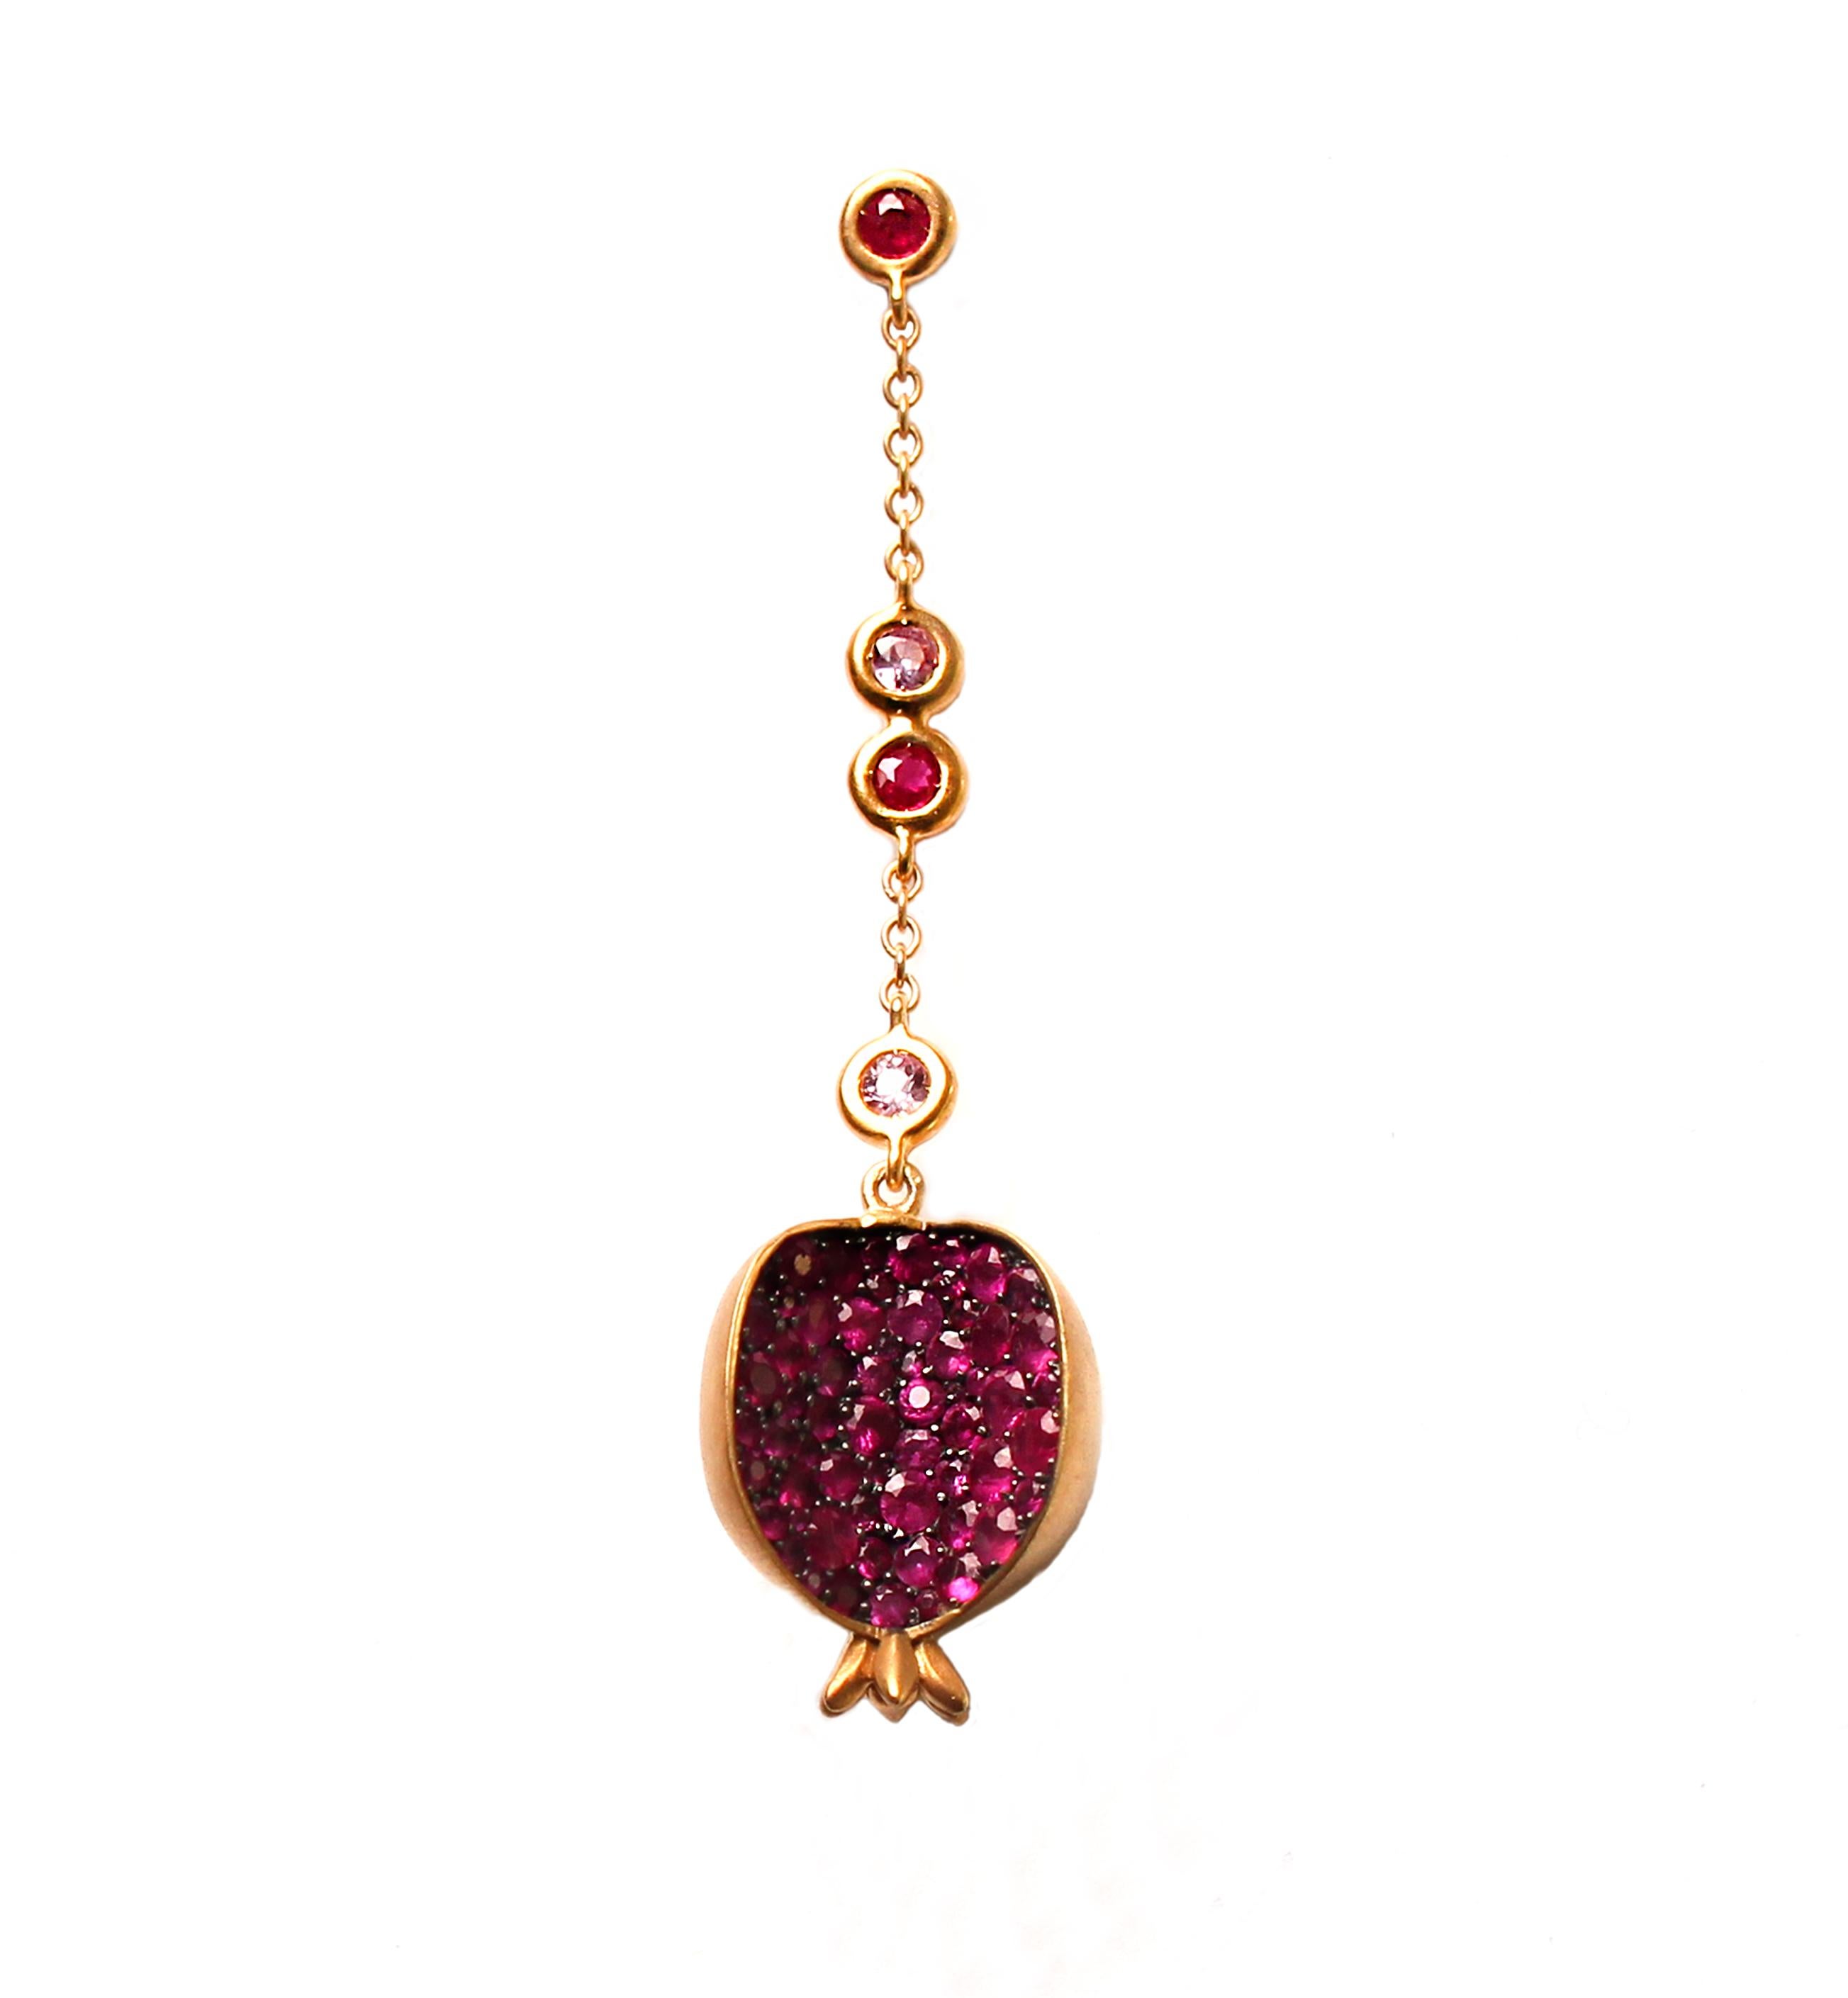 These new and trendy statement earrings are just the right pop. 14k gold, gold plate, ruby, and pink sapphire. Asymmetric lengths, one earring is 3.25